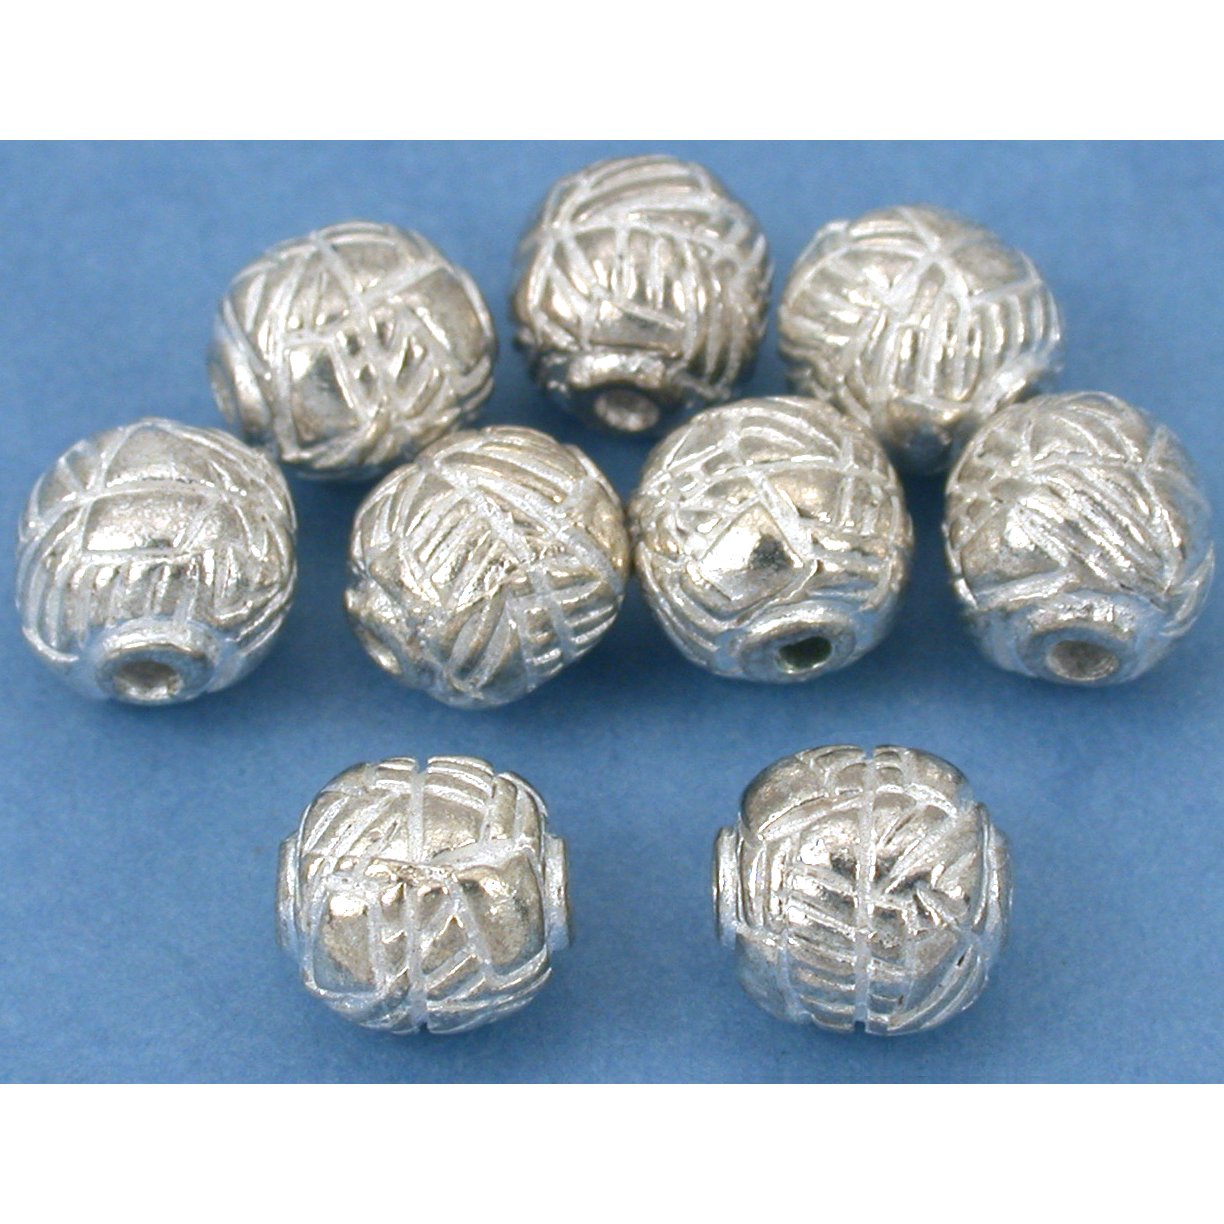 Bali Round Beads Silver Plated 8mm 8Pcs Approx.